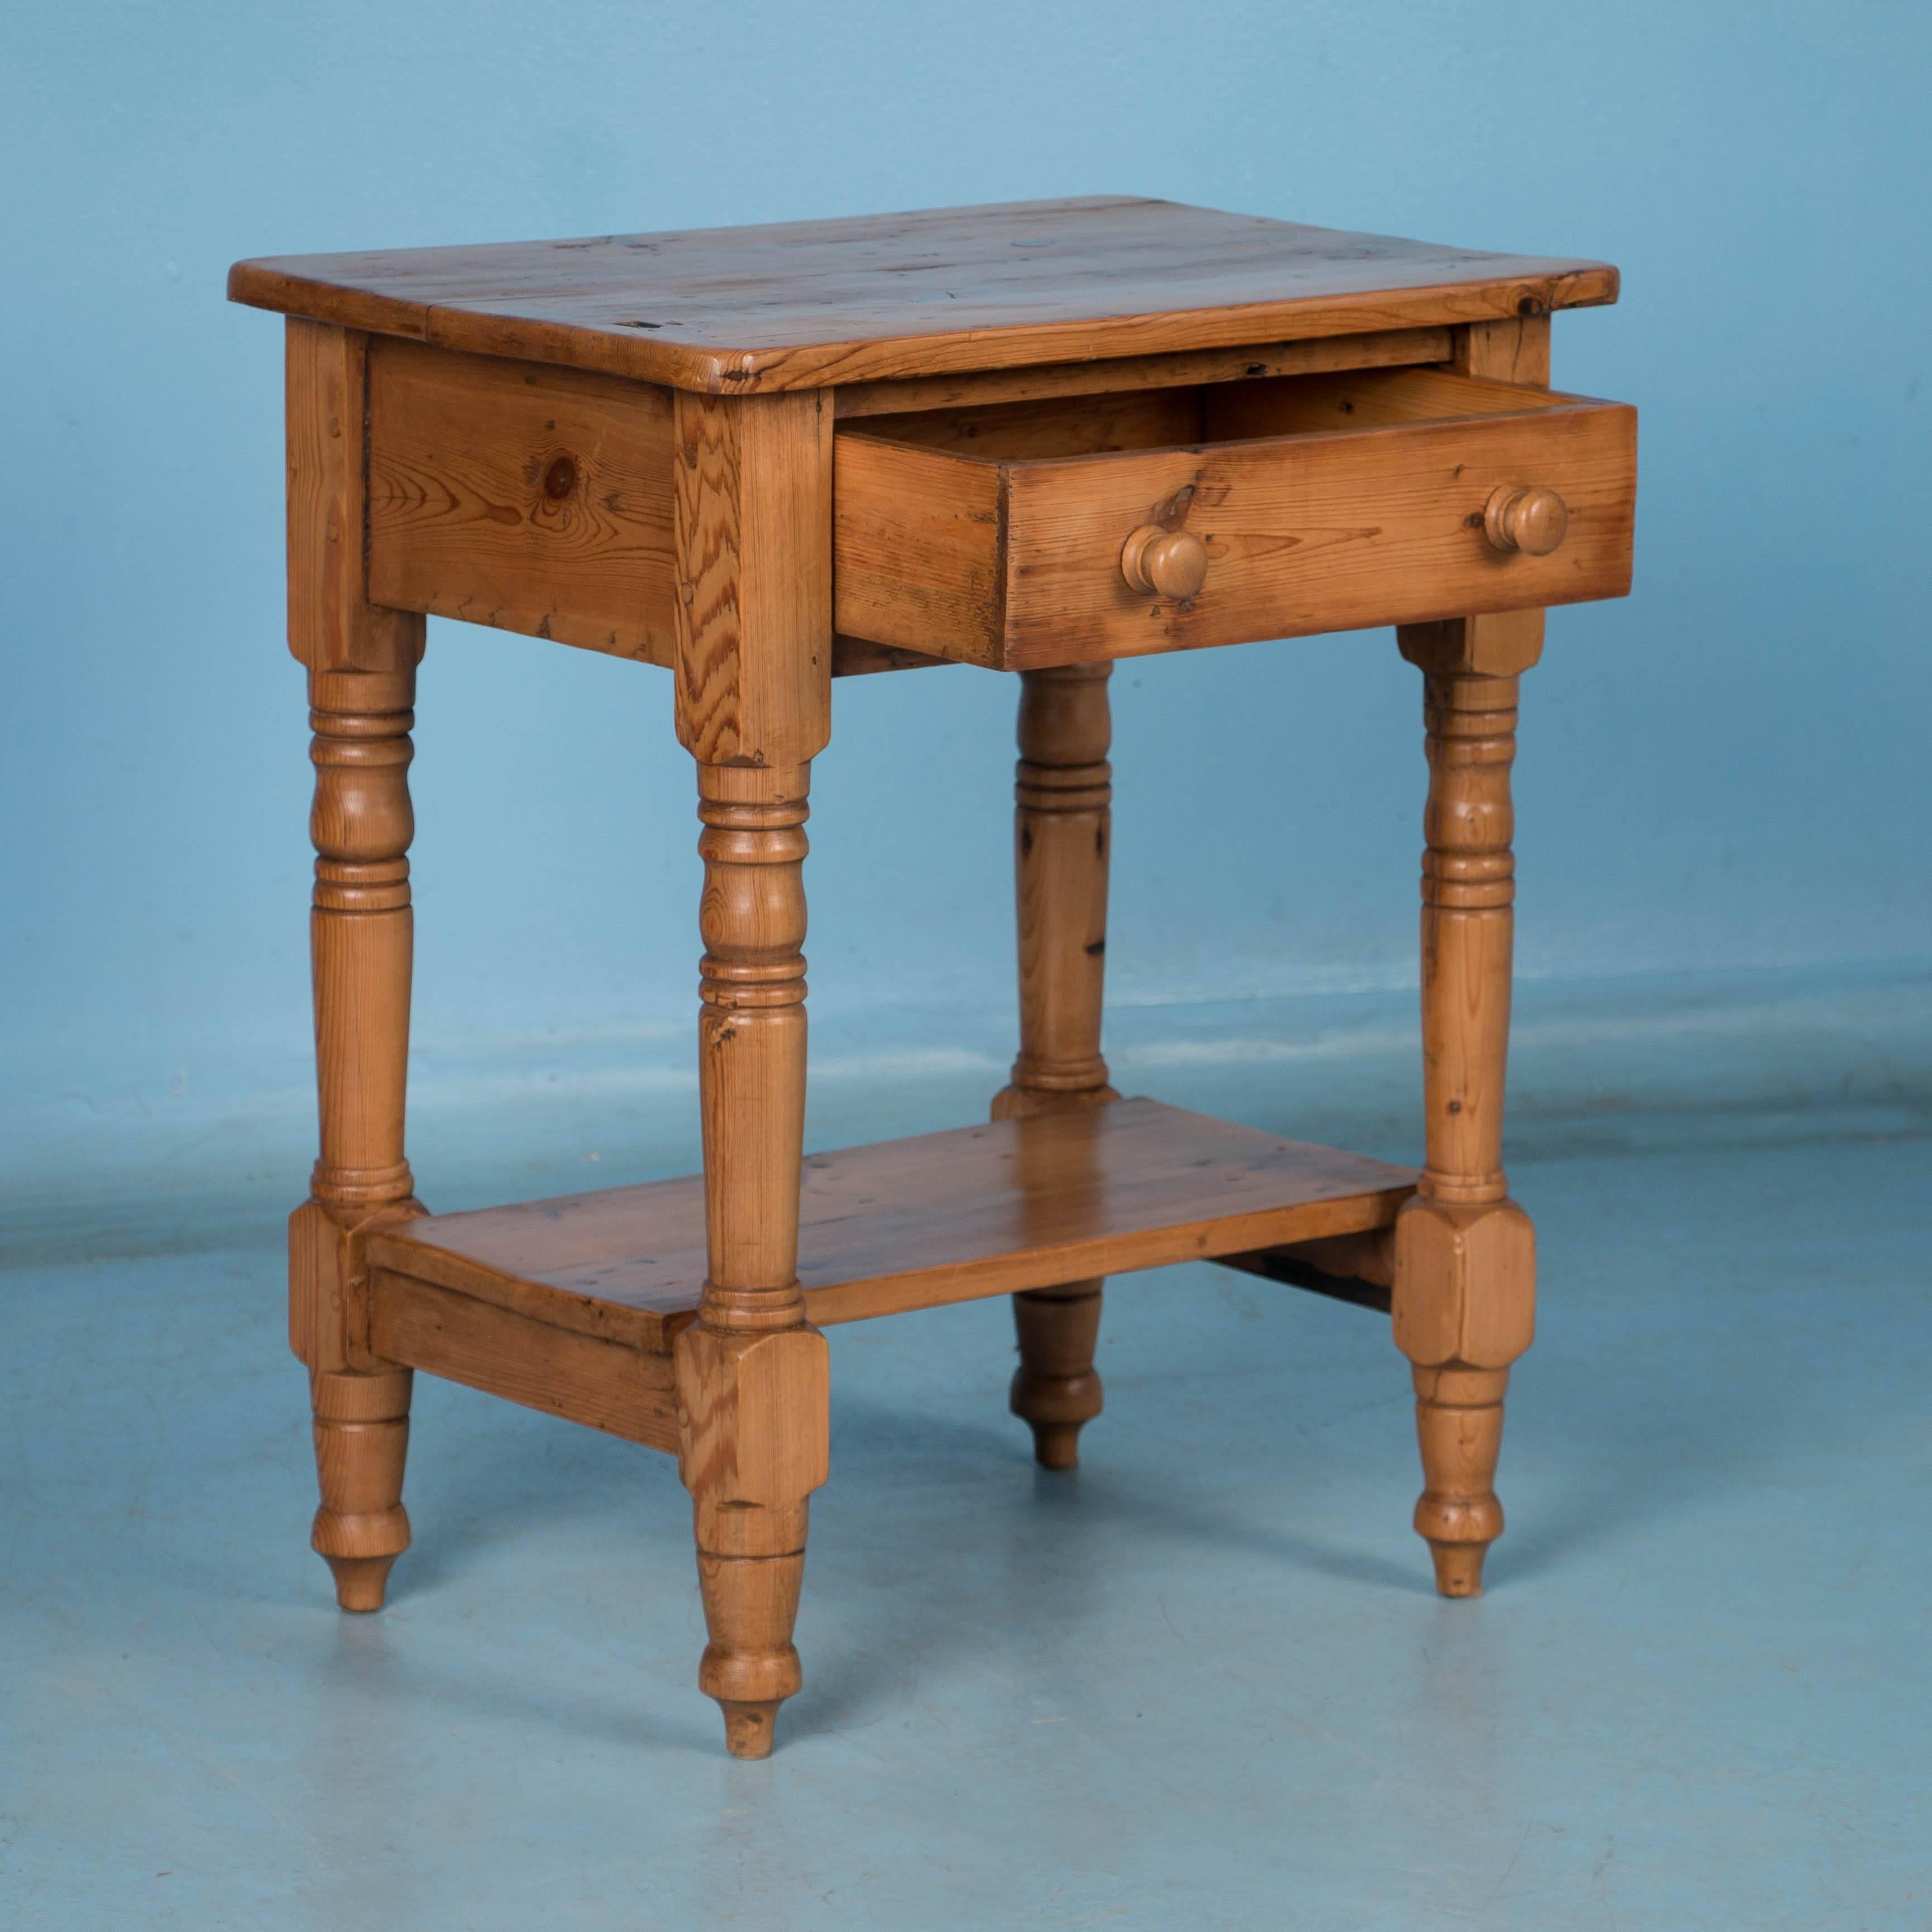 This charming antique pine side table features a single drawer, lower shelf and turned legs with a real country feel. The small size makes this ideal for use as an nightstand or end table. The table has been professionally restored and sealed with a